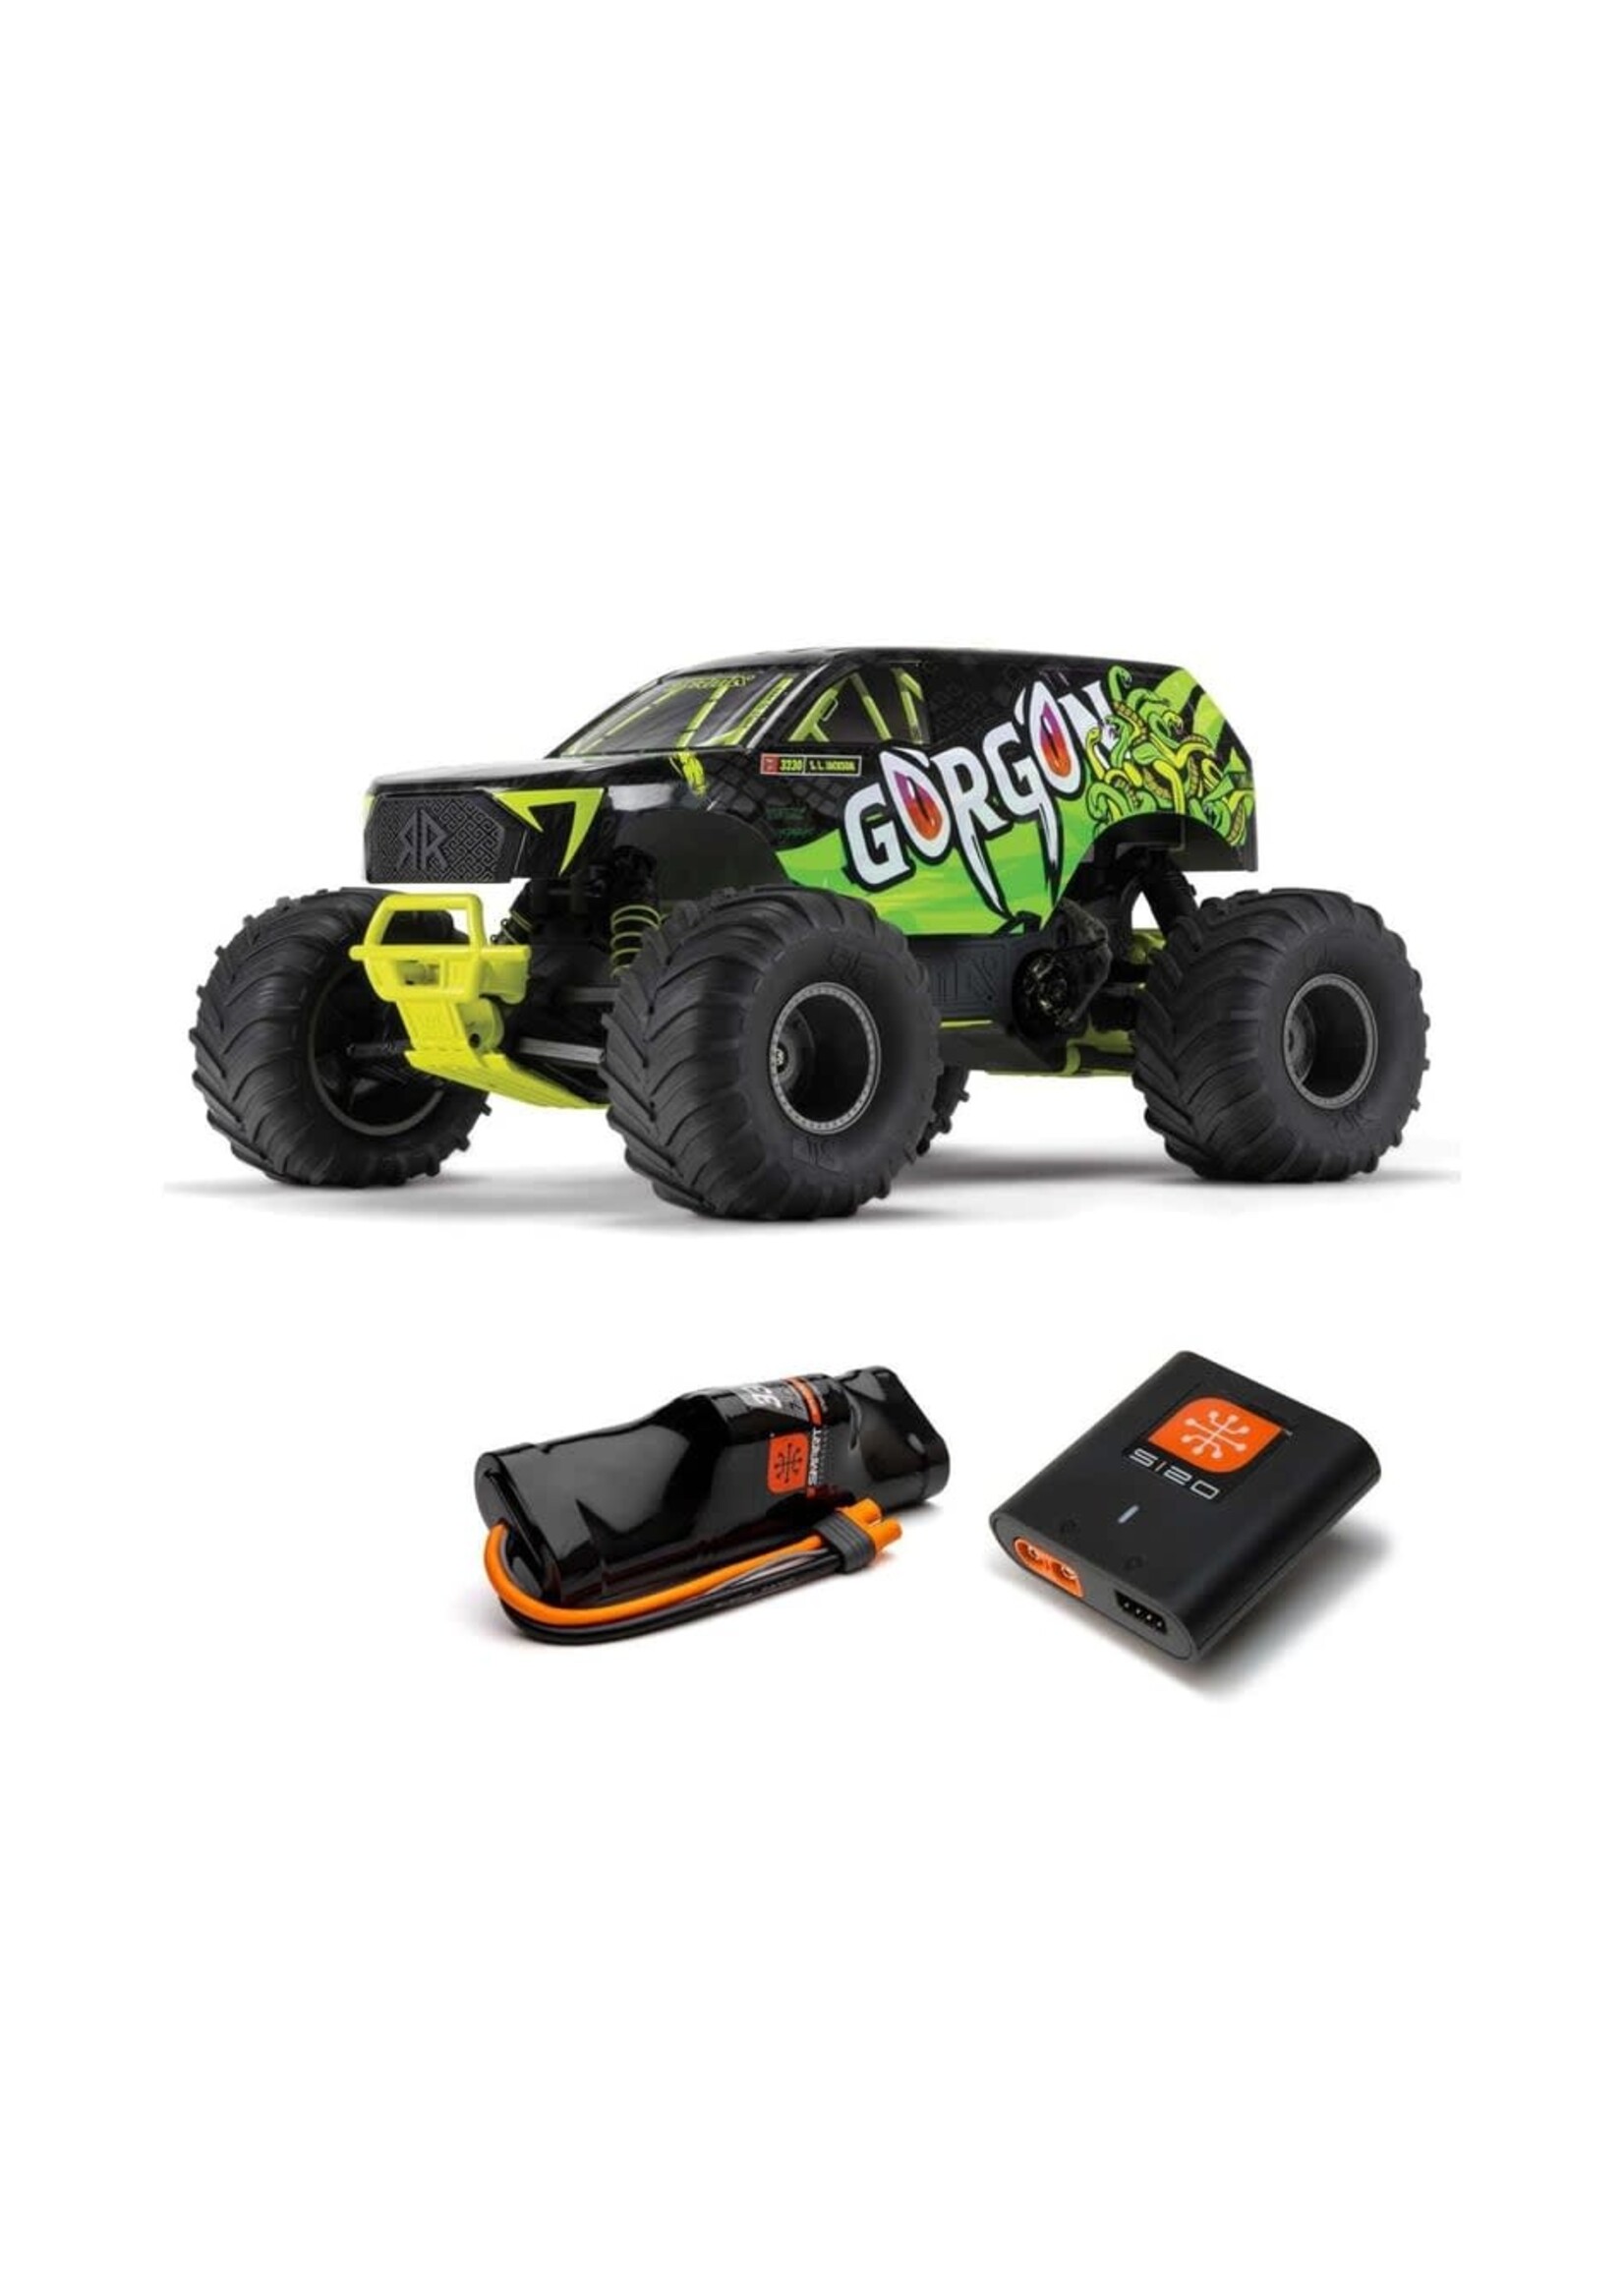 ARRMA ARA3230ST1 ARRMA 1/10 GORGON 4X2 MEGA 550 Brushed Monster Truck RTR with Battery & Charger, Yellow